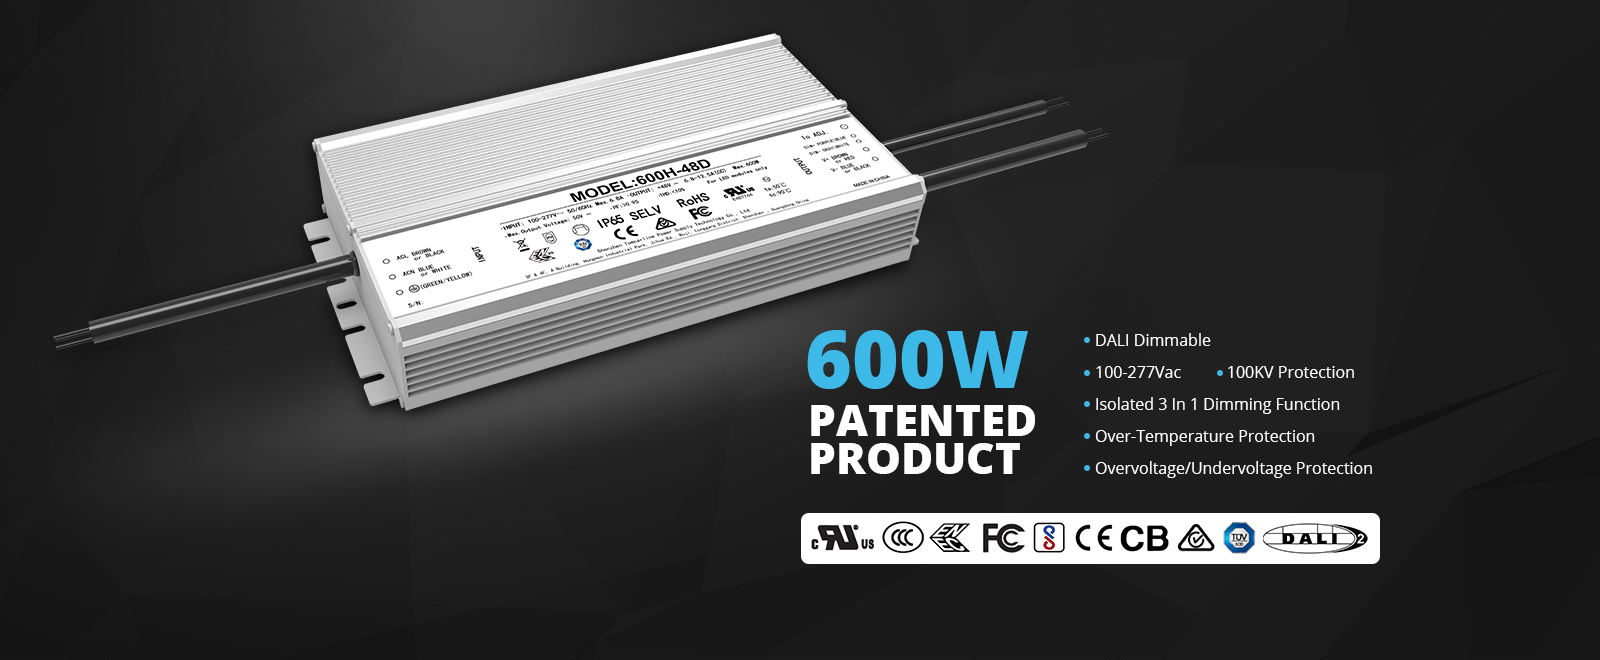 600W PATENTED PRODUCT